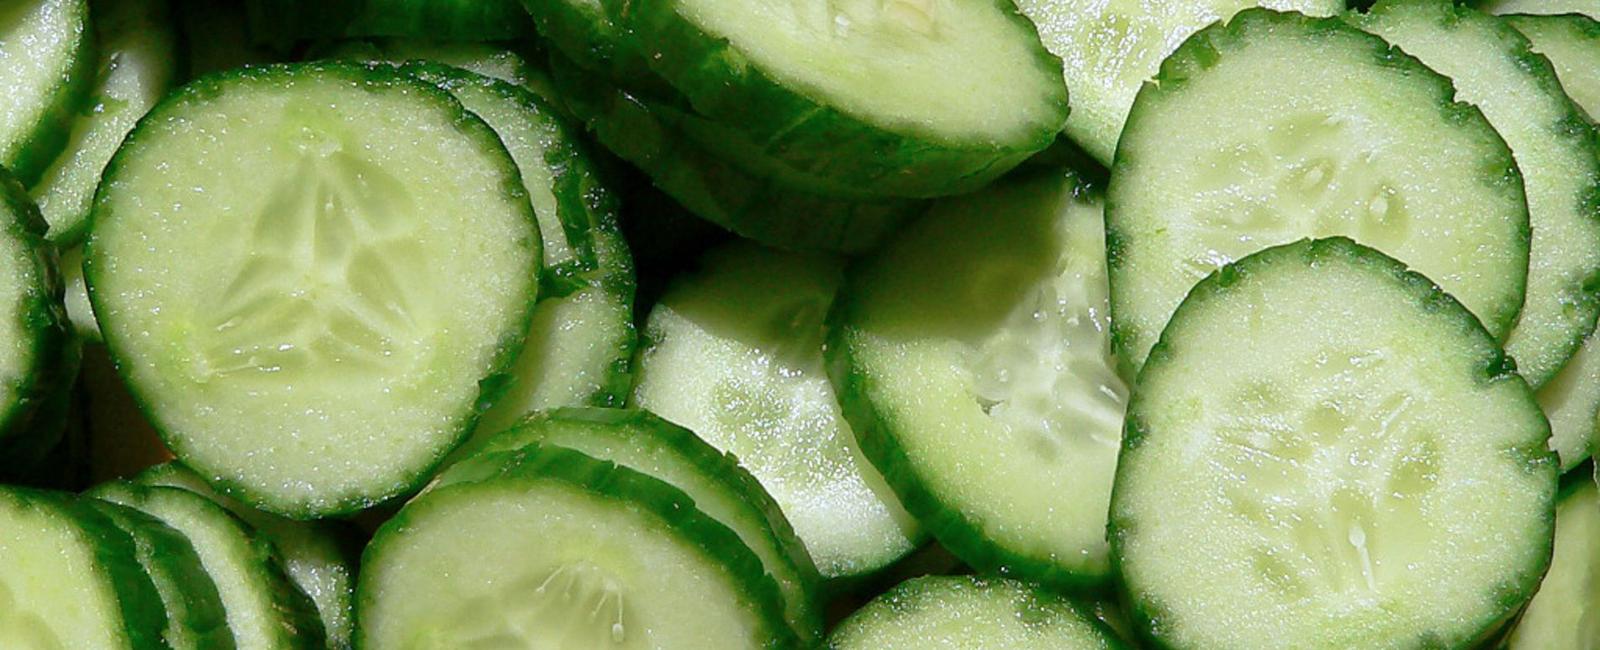 Cucumber seeds give you heartburn and cucumbers give you gas